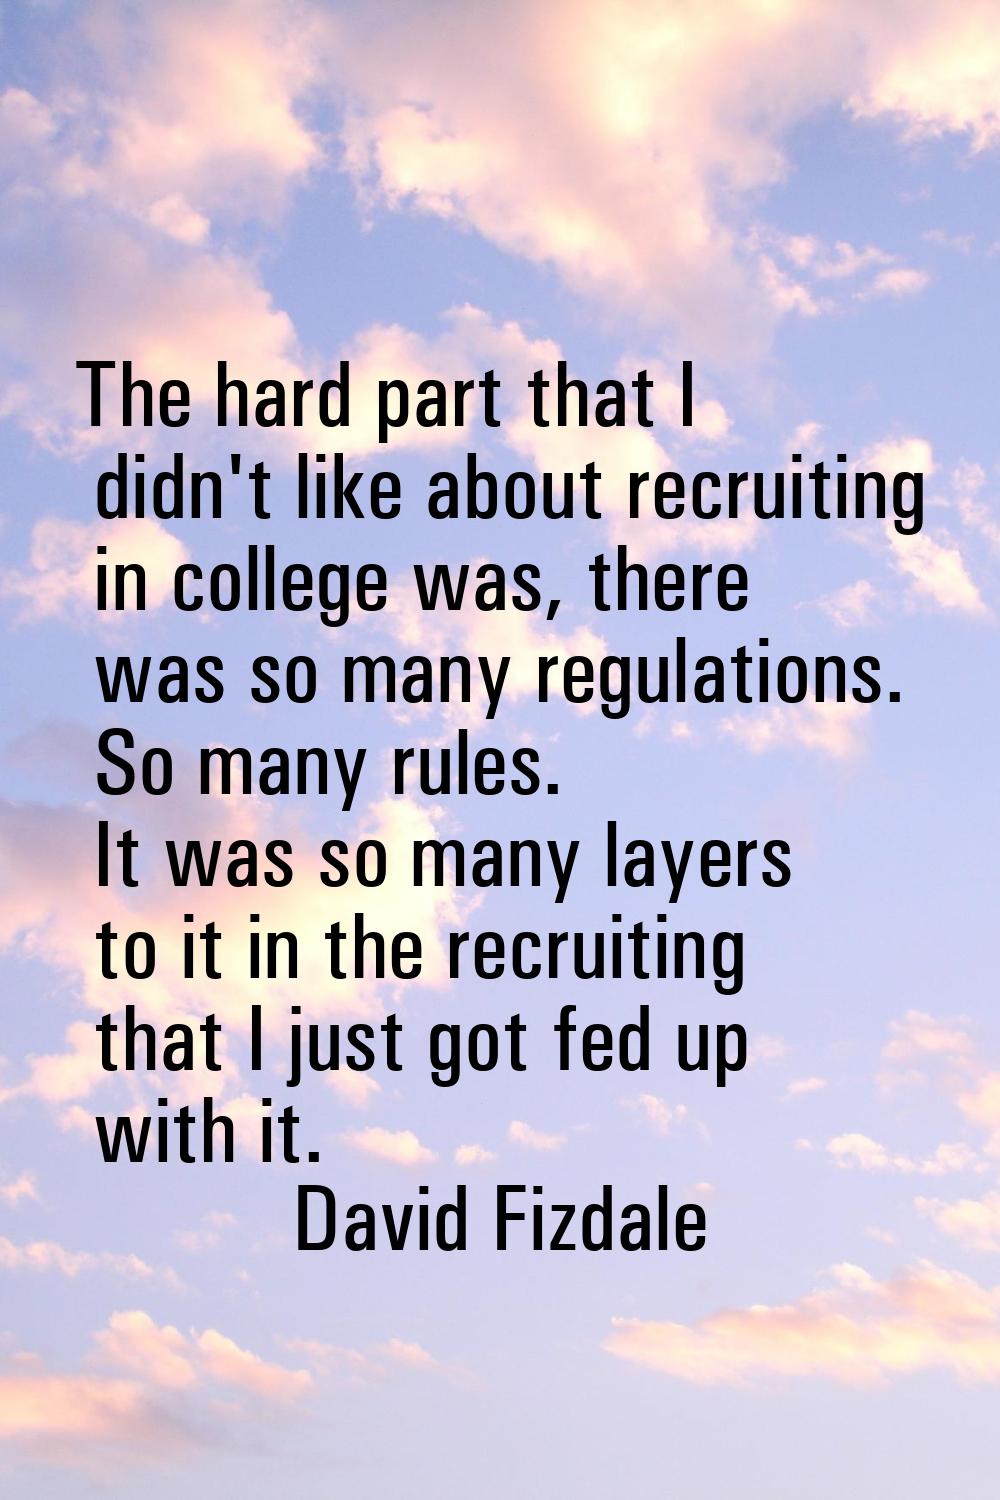 The hard part that I didn't like about recruiting in college was, there was so many regulations. So